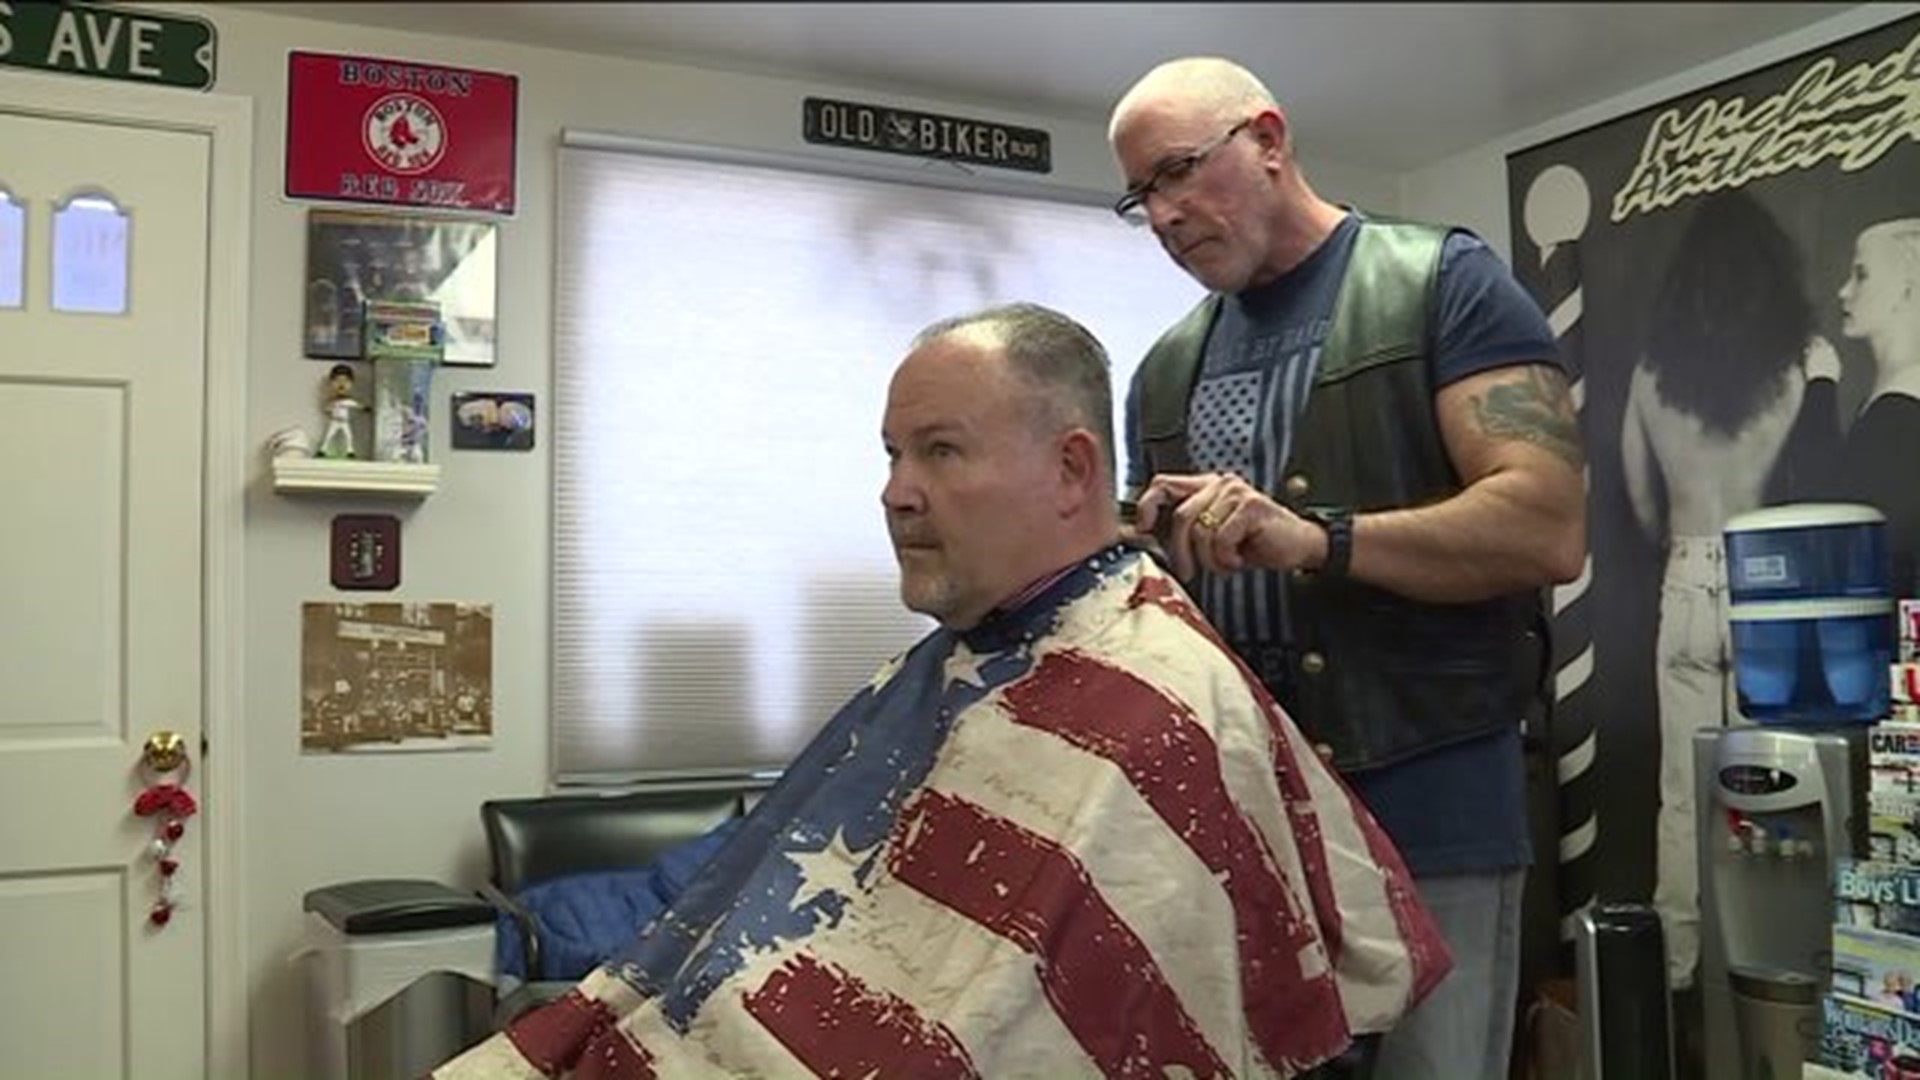 Free haircuts for first responders